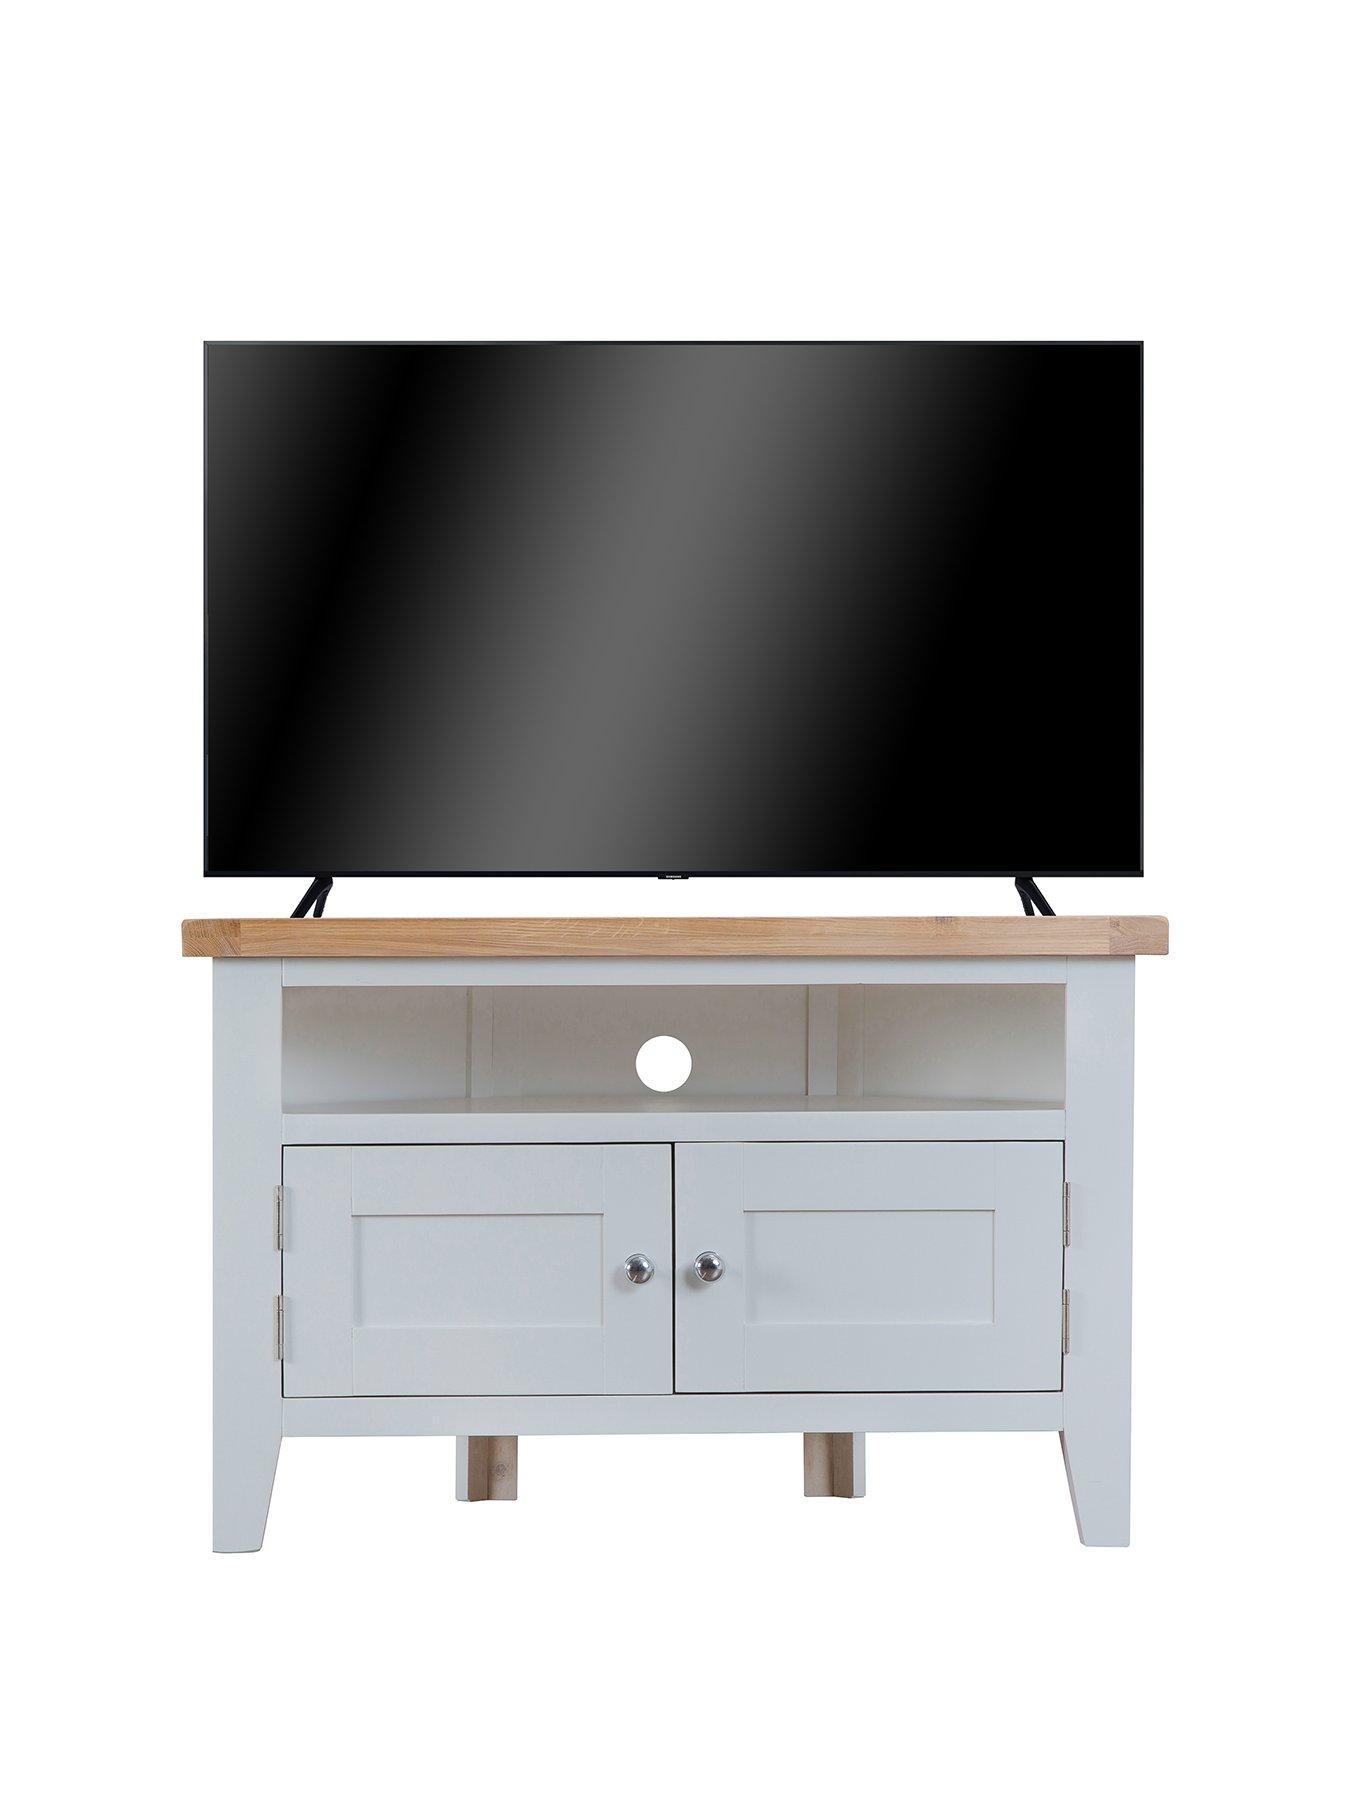 Details about   High Gloss TV Stand Unit Cabinet Console Table for 32-60 inch Screen TVs 